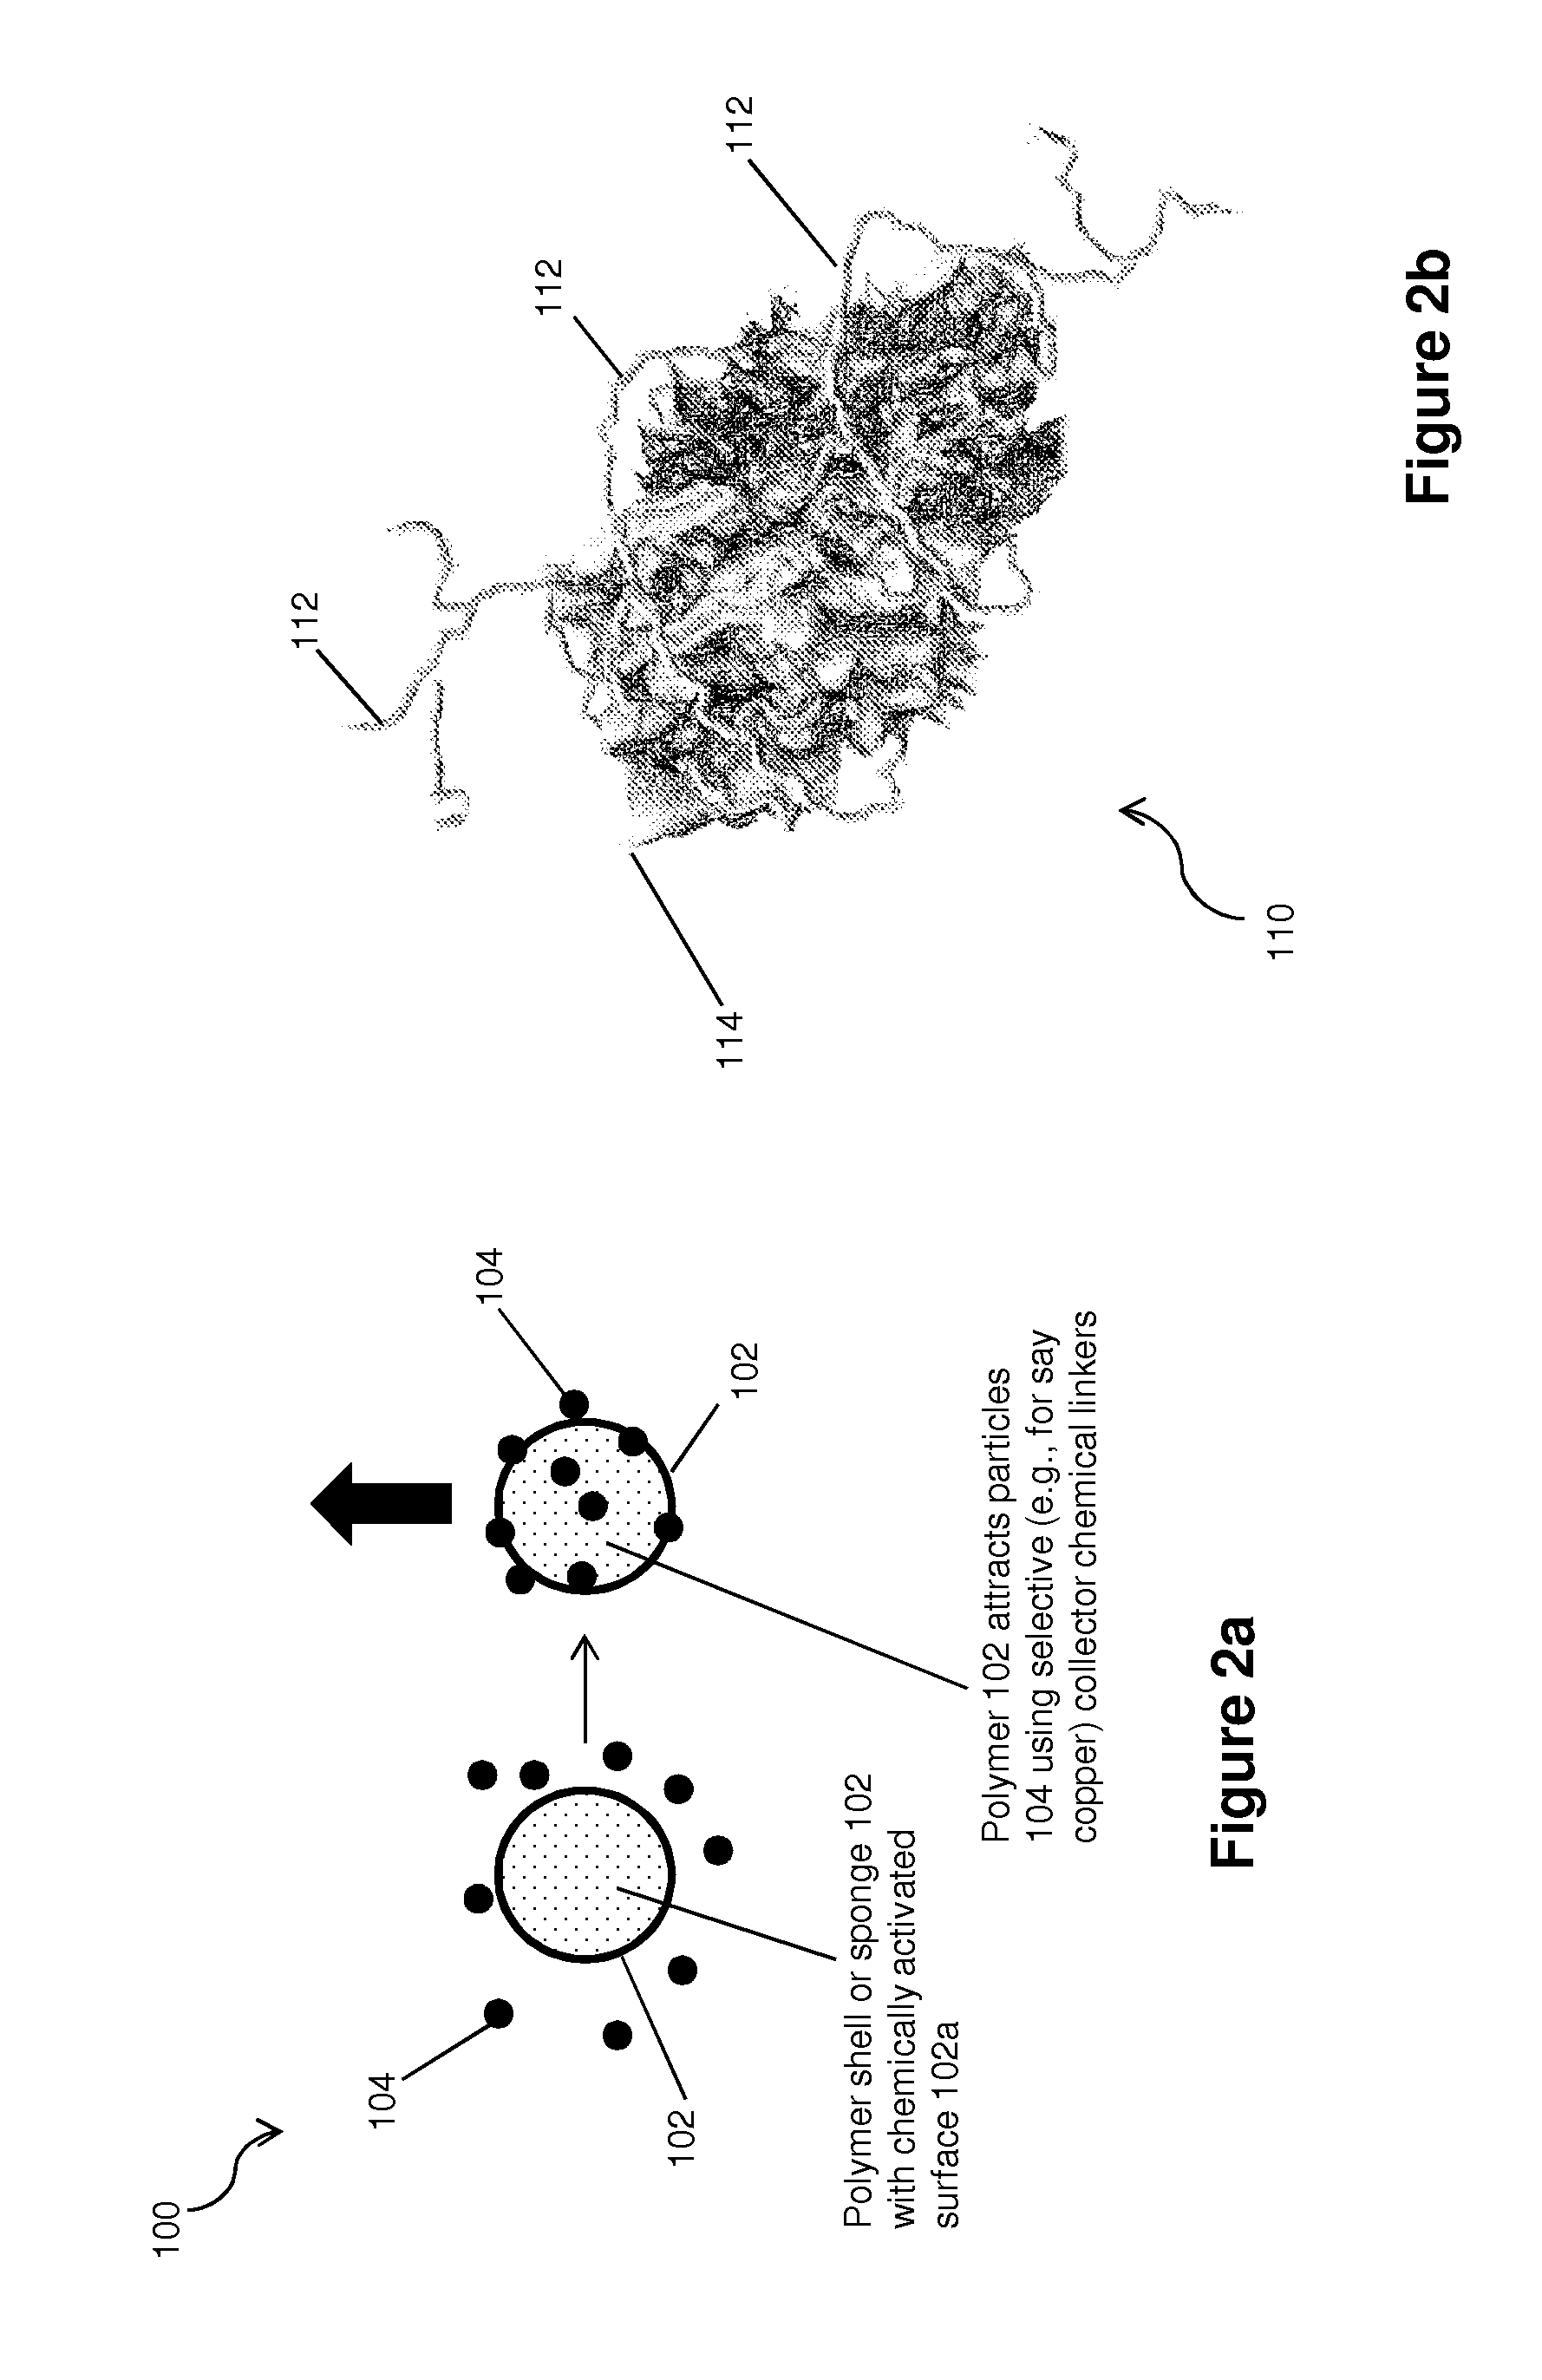 Flotation Separation Using Lightweight Synthetic Beads or Bubbles